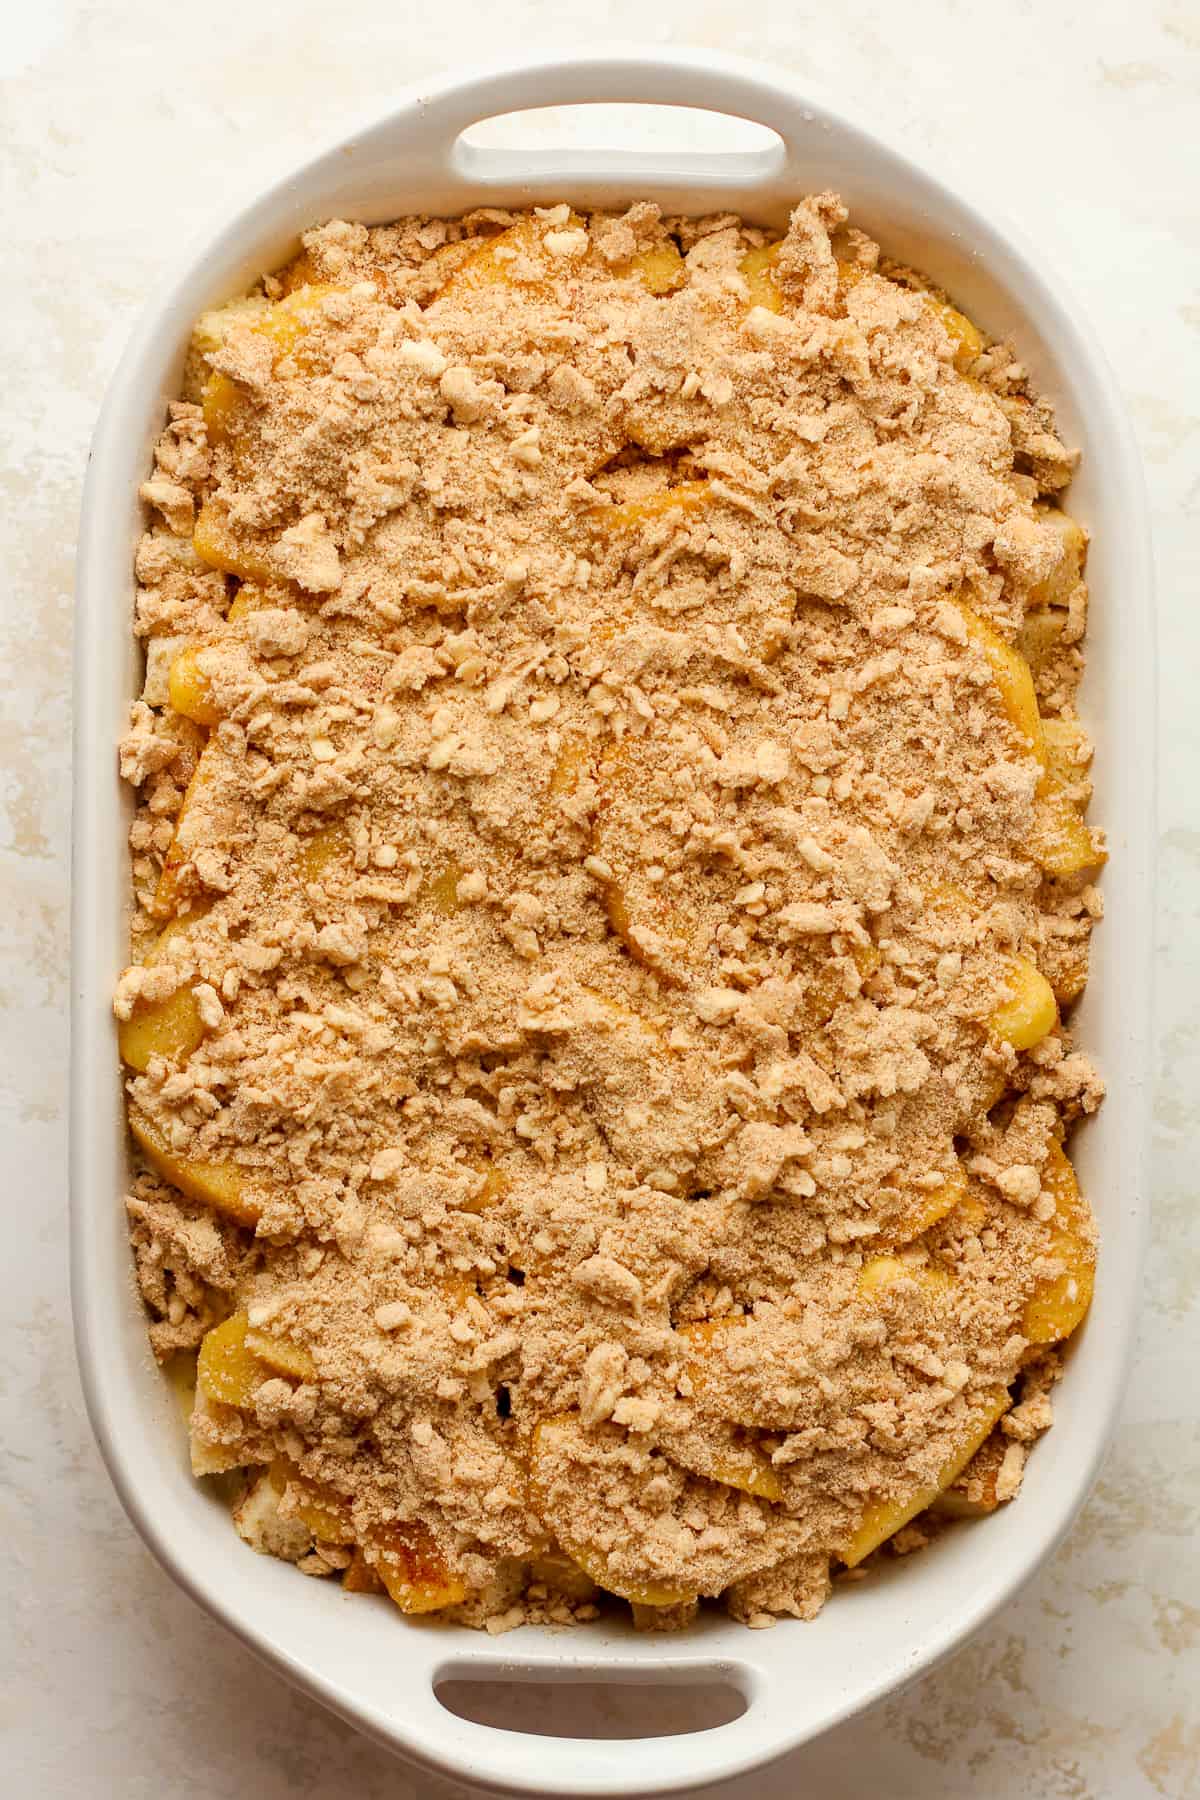 The French toast casserole ready to bake.